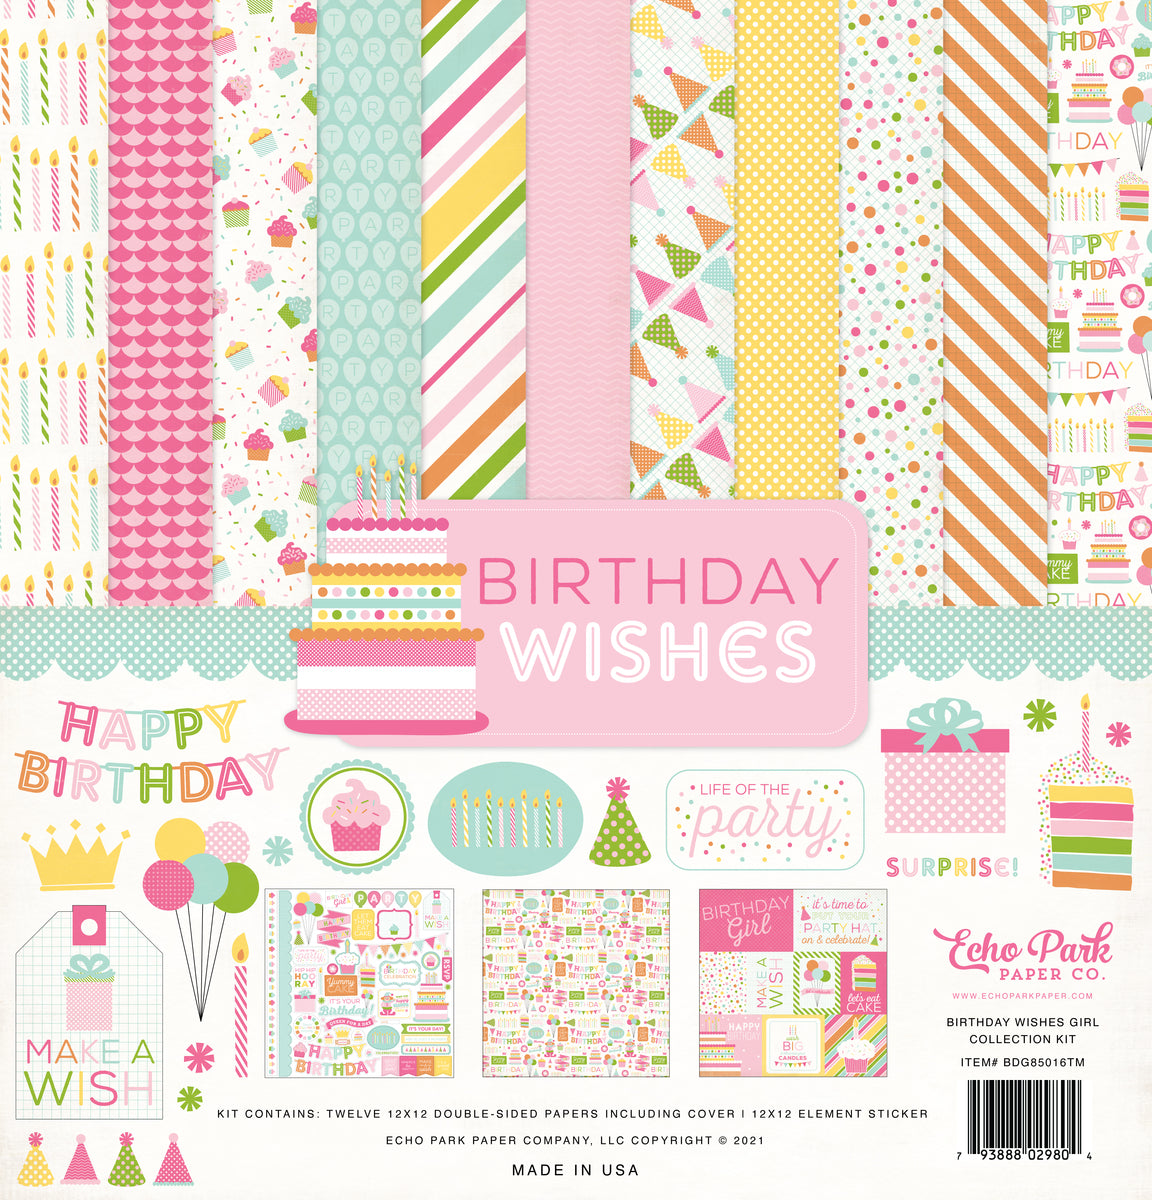 Birthday Wishes Girl - 12x12 collection kit with element stickers to celebrate girl's party - Echo Park Paper